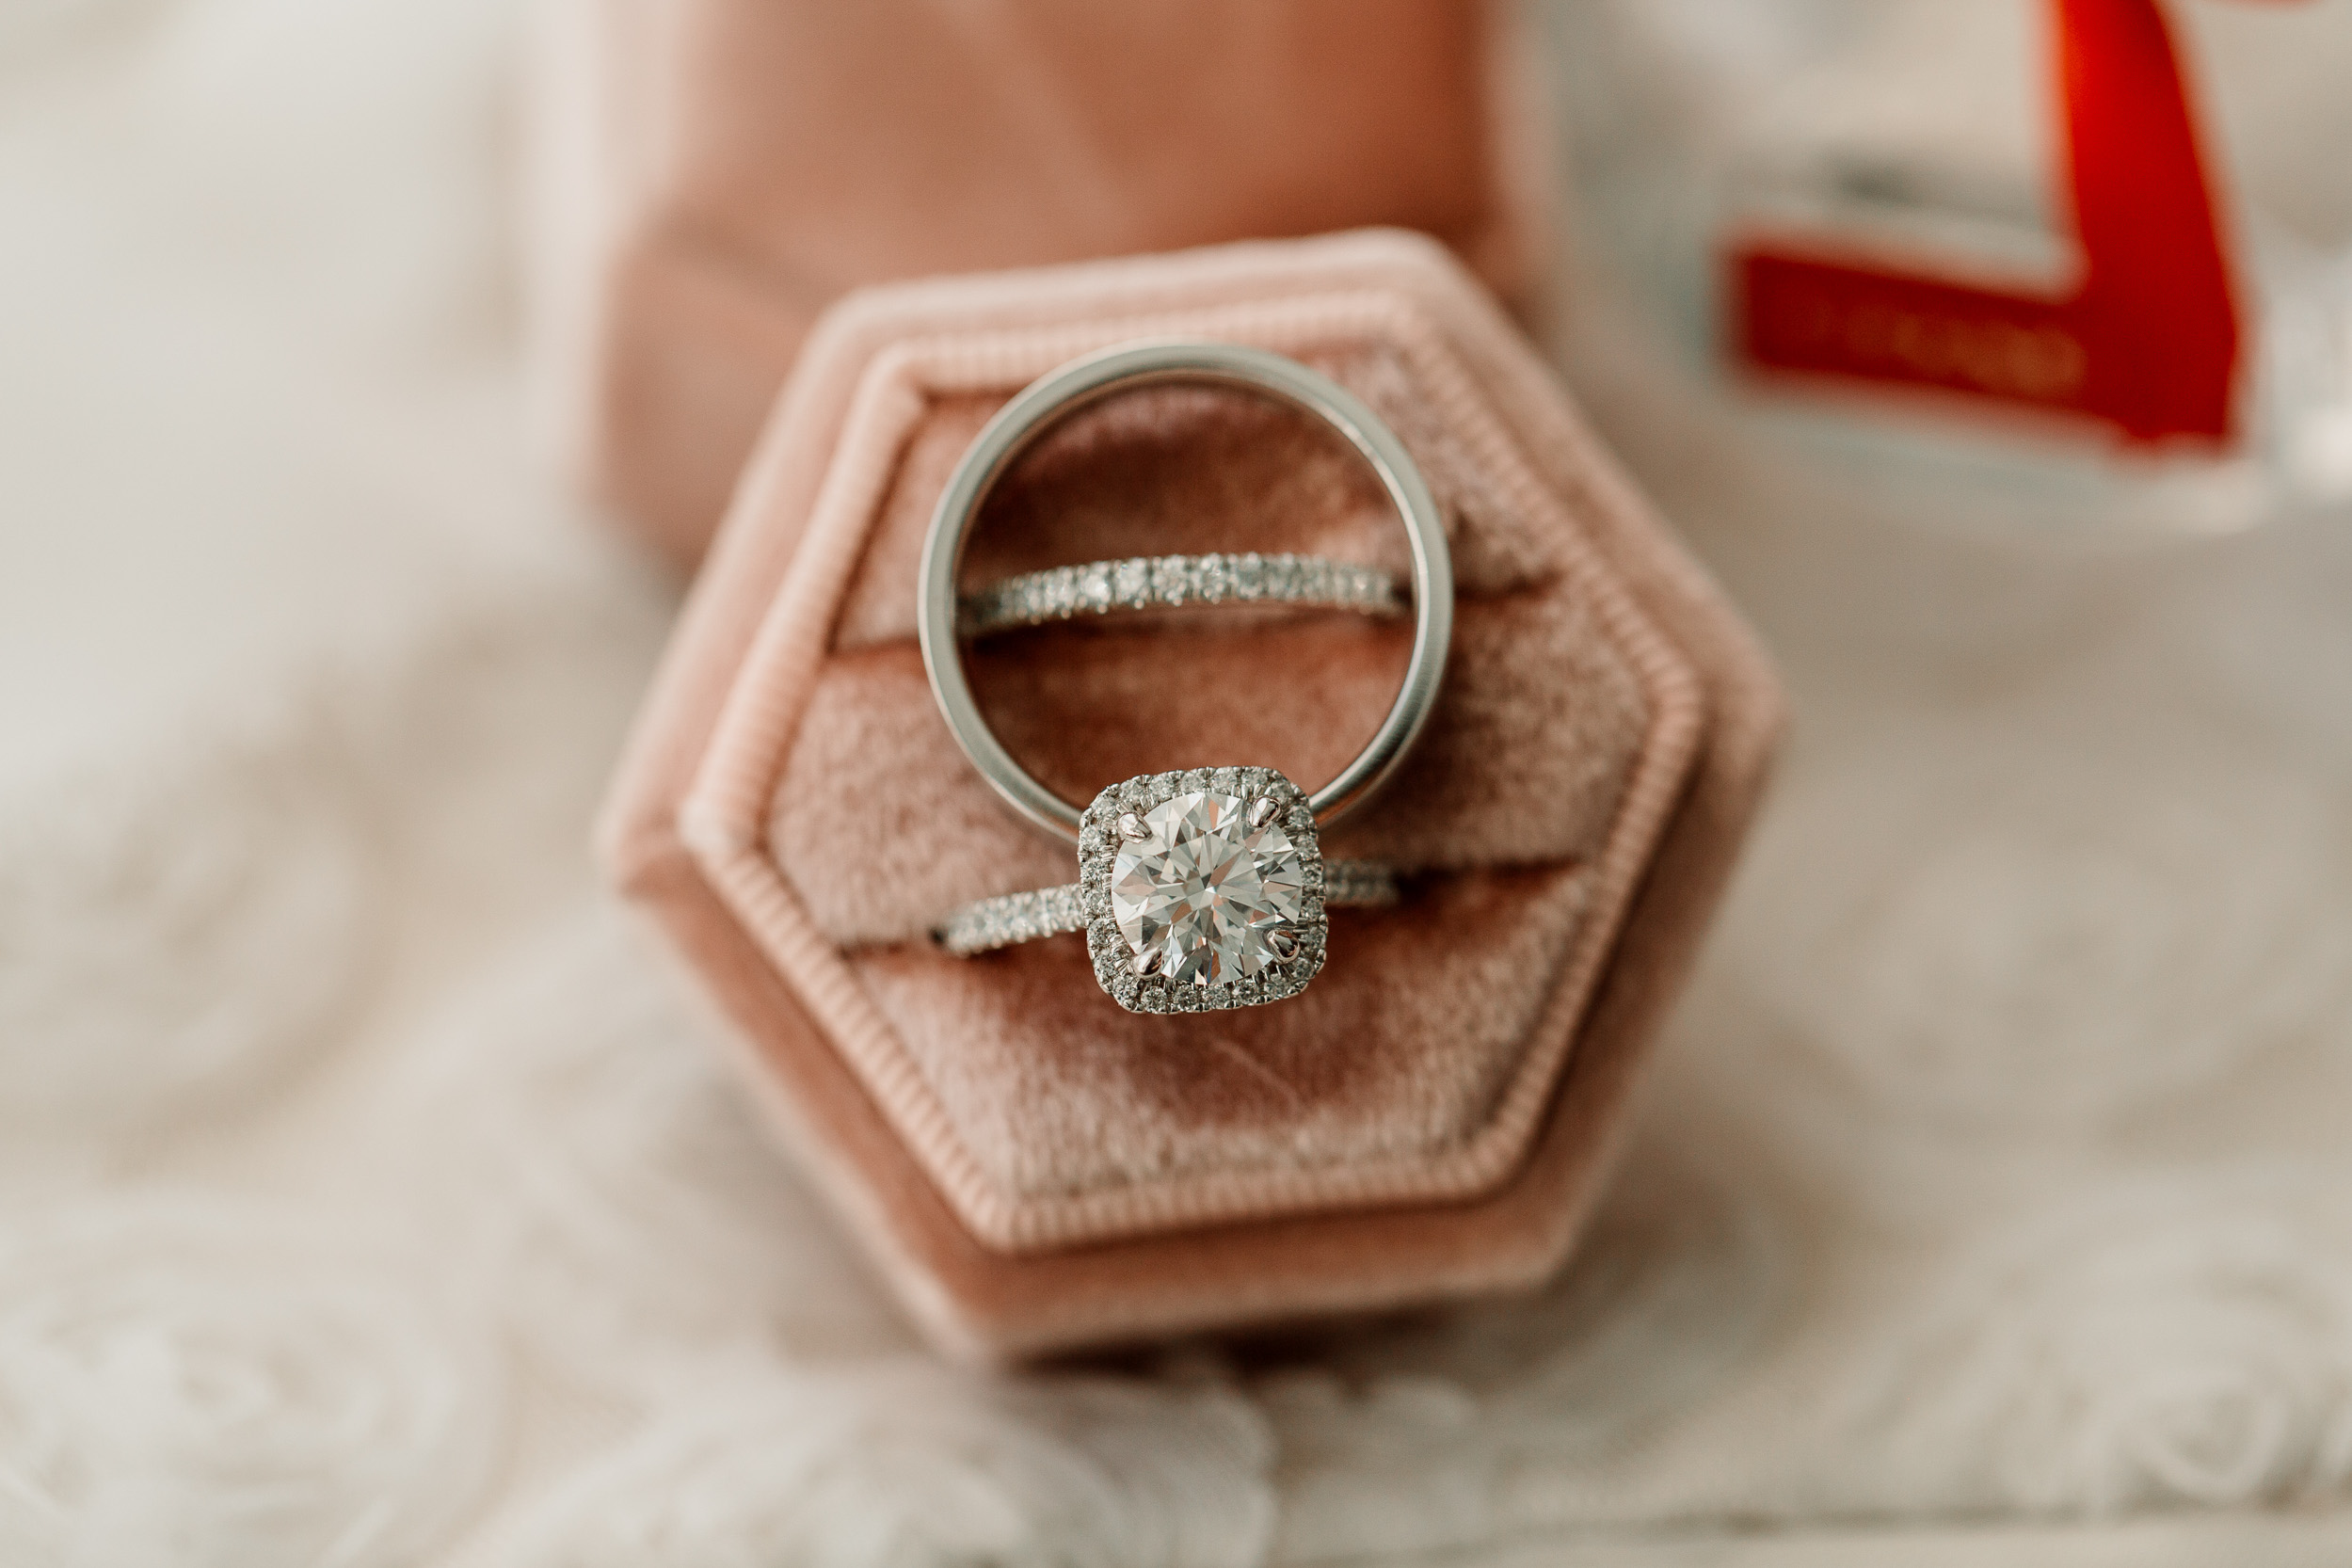 Detail photos | wedding bands and engagement ring | postponed Chicago wedding reception
